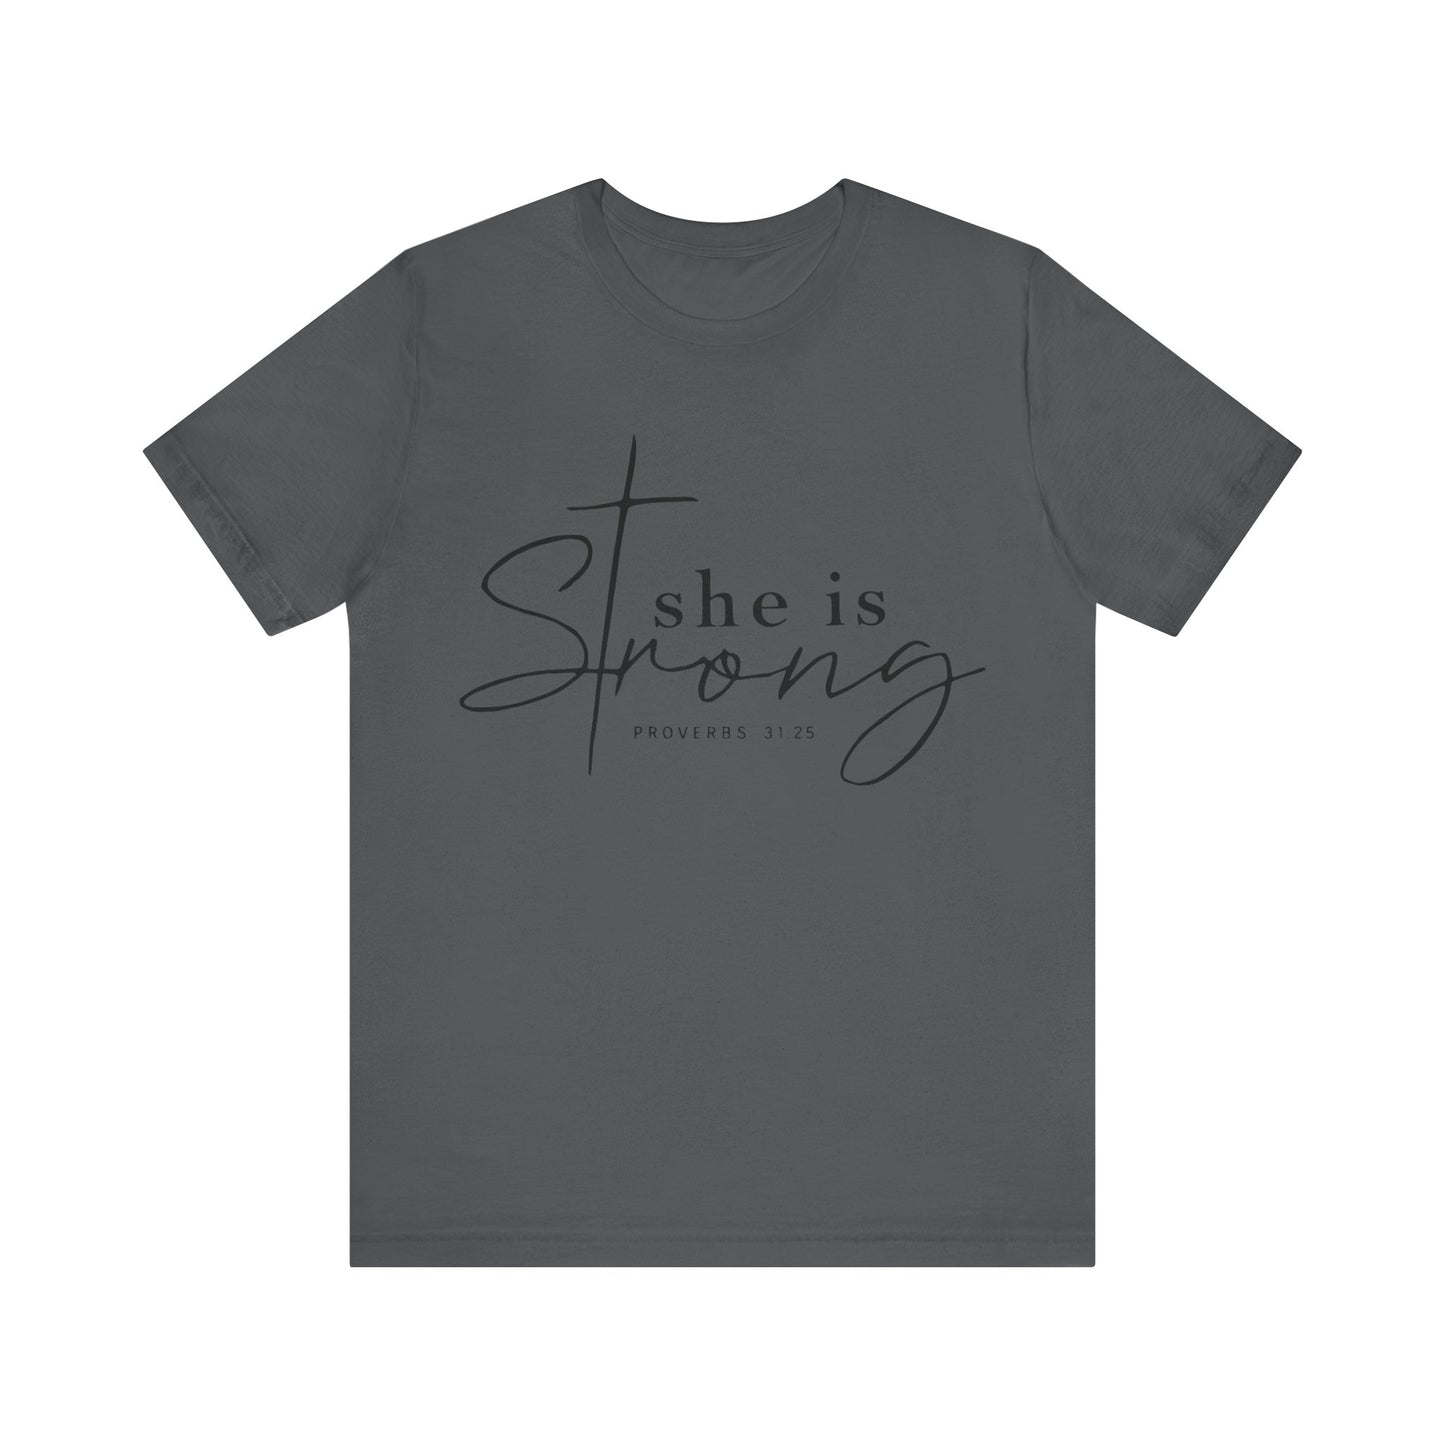 "She is Strong Proverbs 31:25 Christian T-Shirt with Cross"